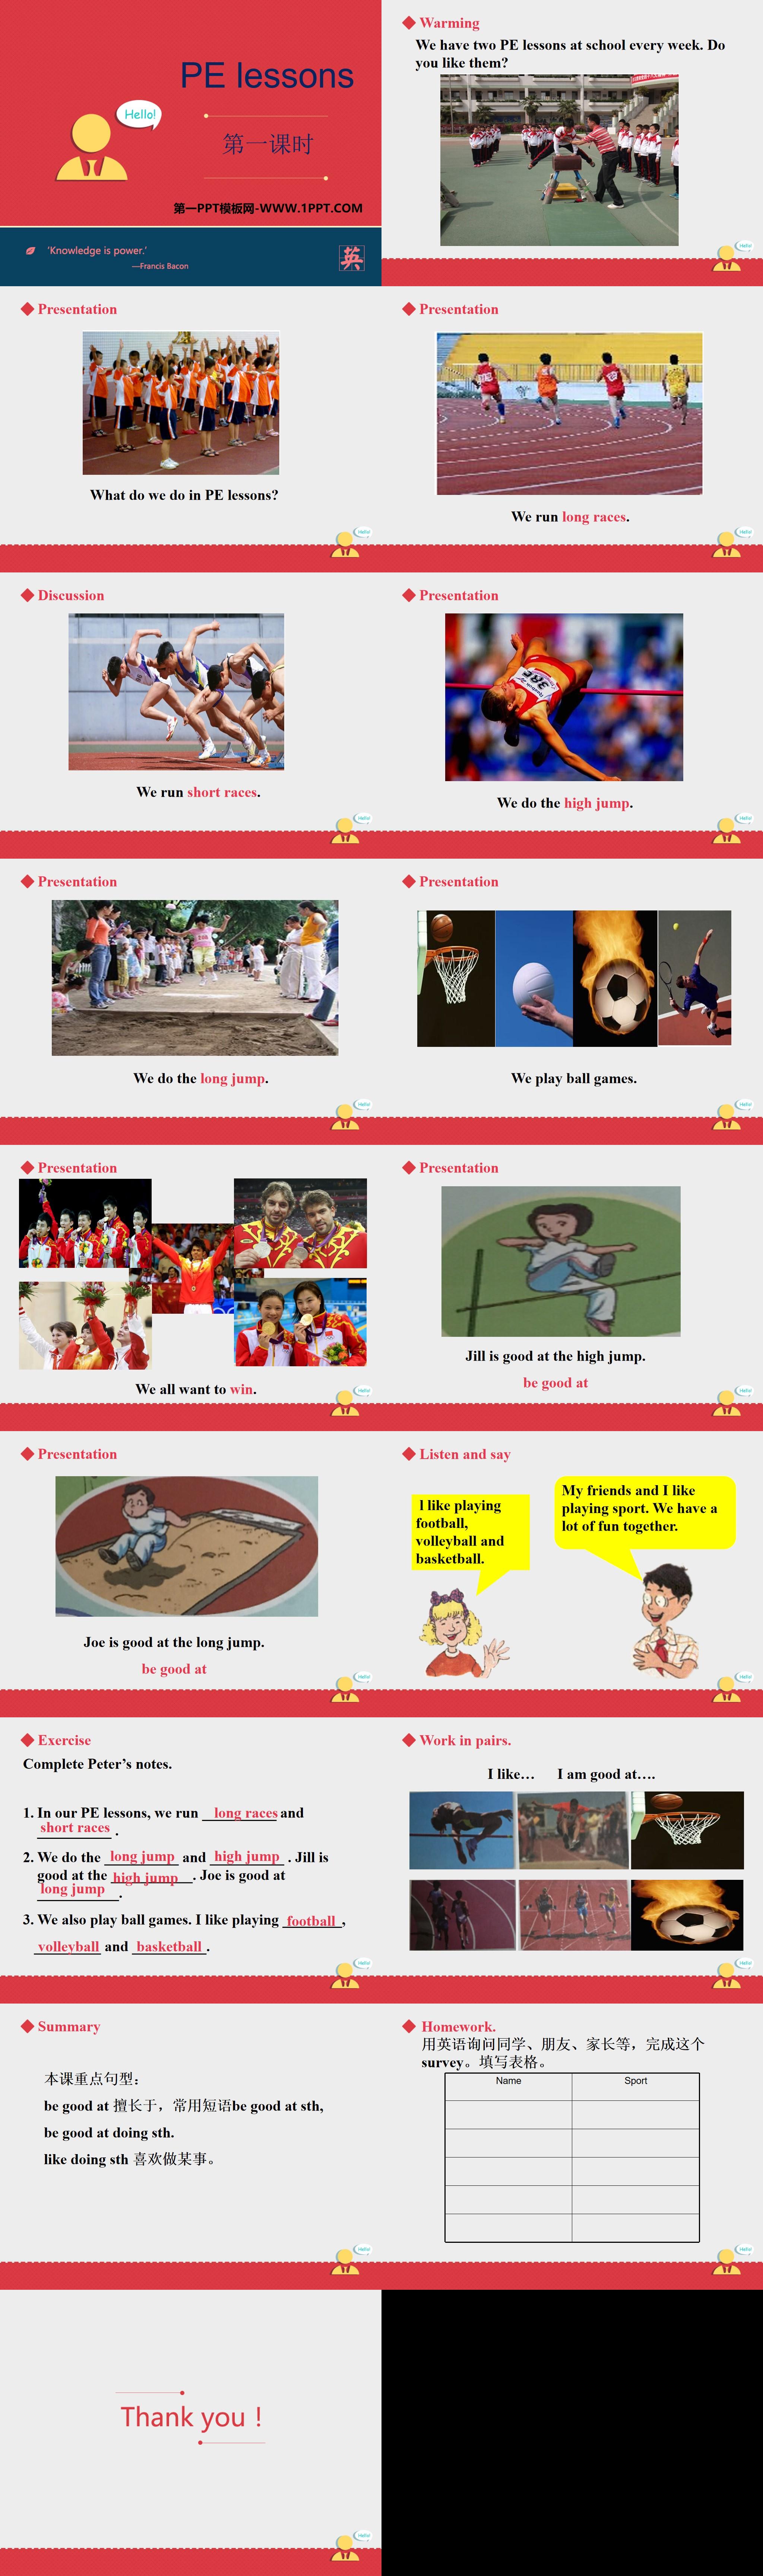 《PE lessons》PPT
（2）